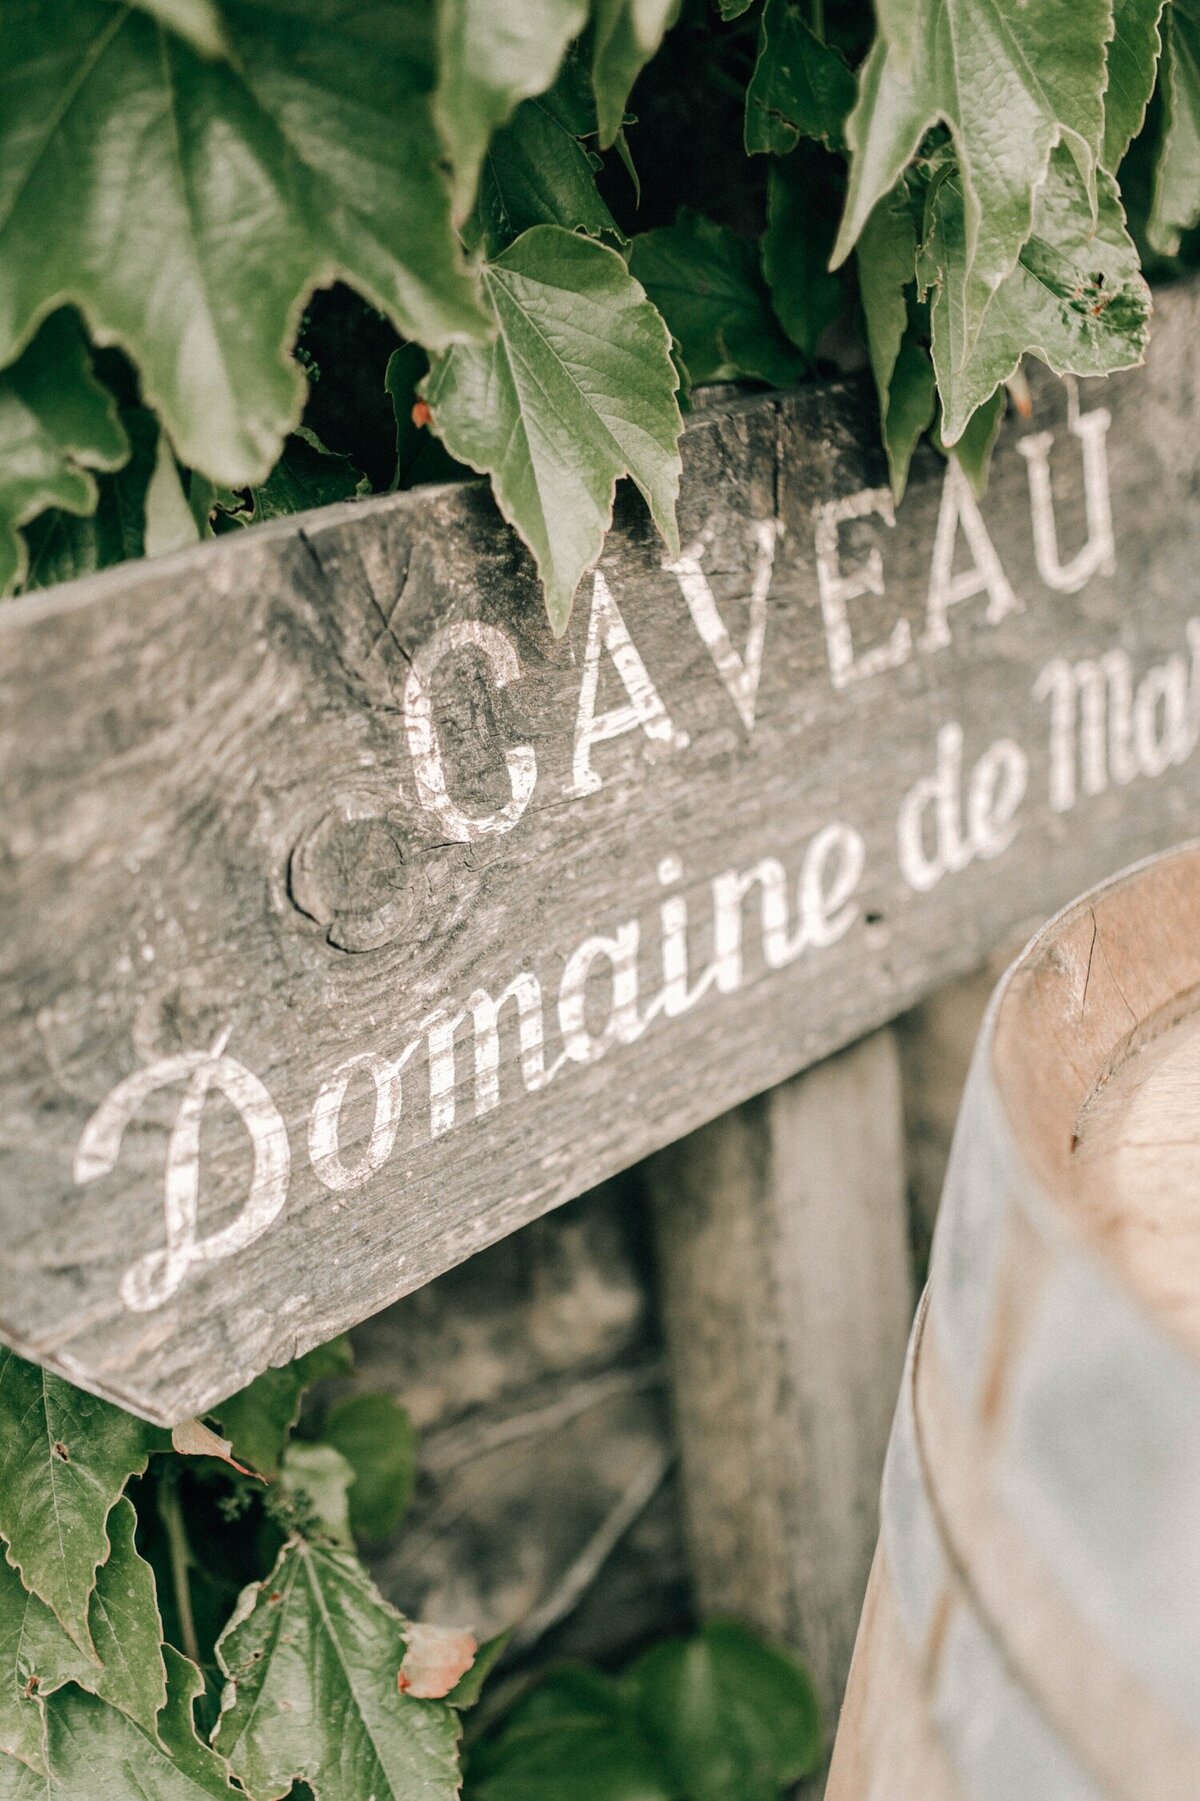 33_Domaine_de_Marie_Luxury_Wedding_Photographer (33 von 36)_An elegant wedding in Provence at Domaine de Marie. See this wedding captured by Luxury wedding photographer in France, Flora and Grace.